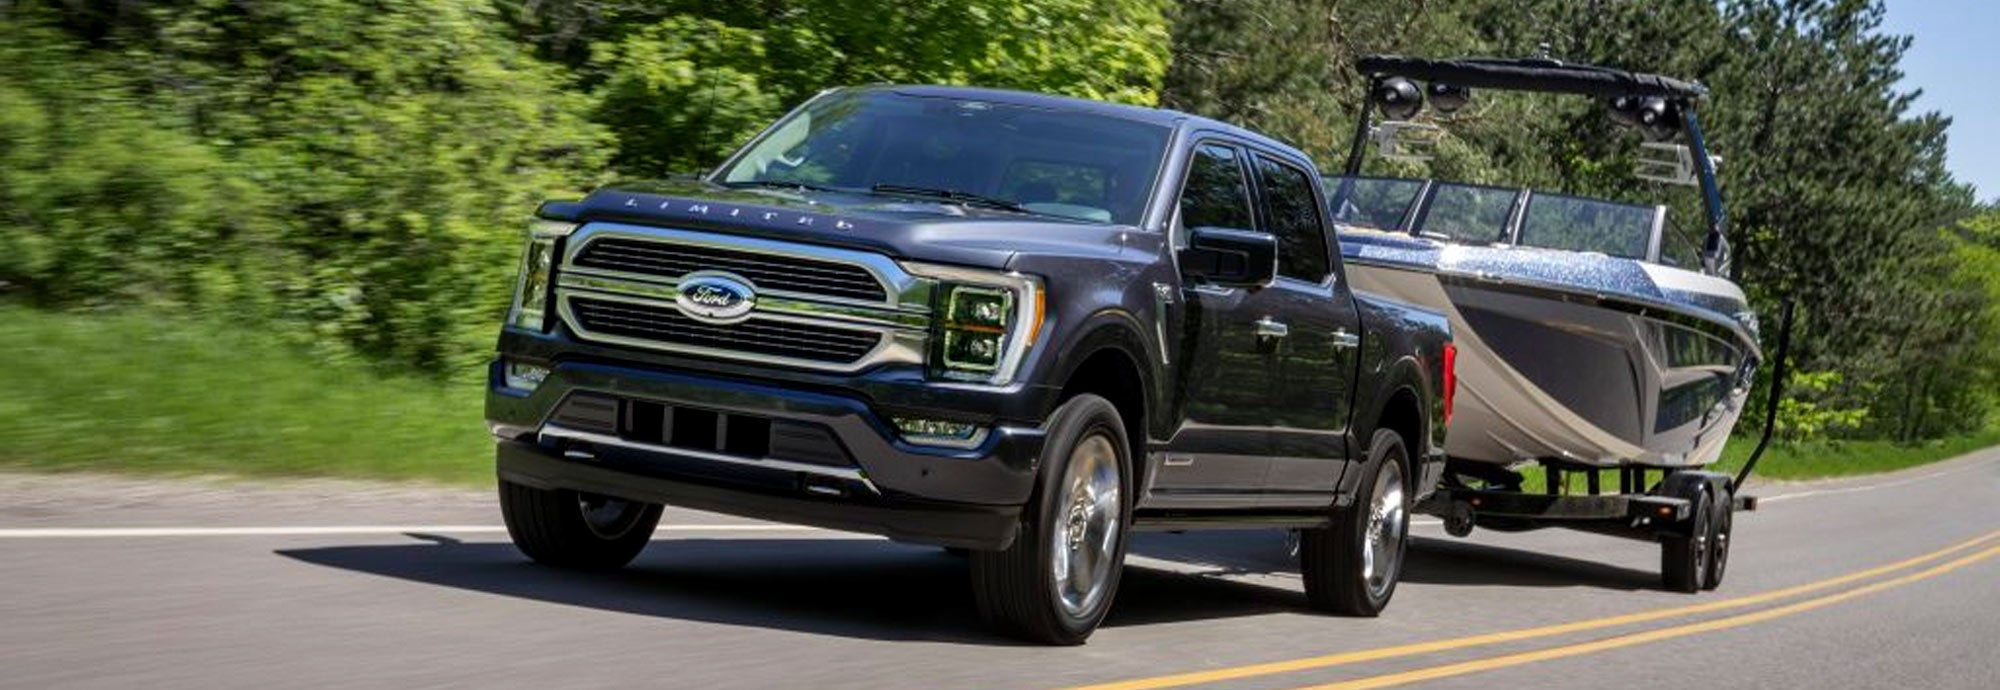 Ford Trucks Towing Capacity